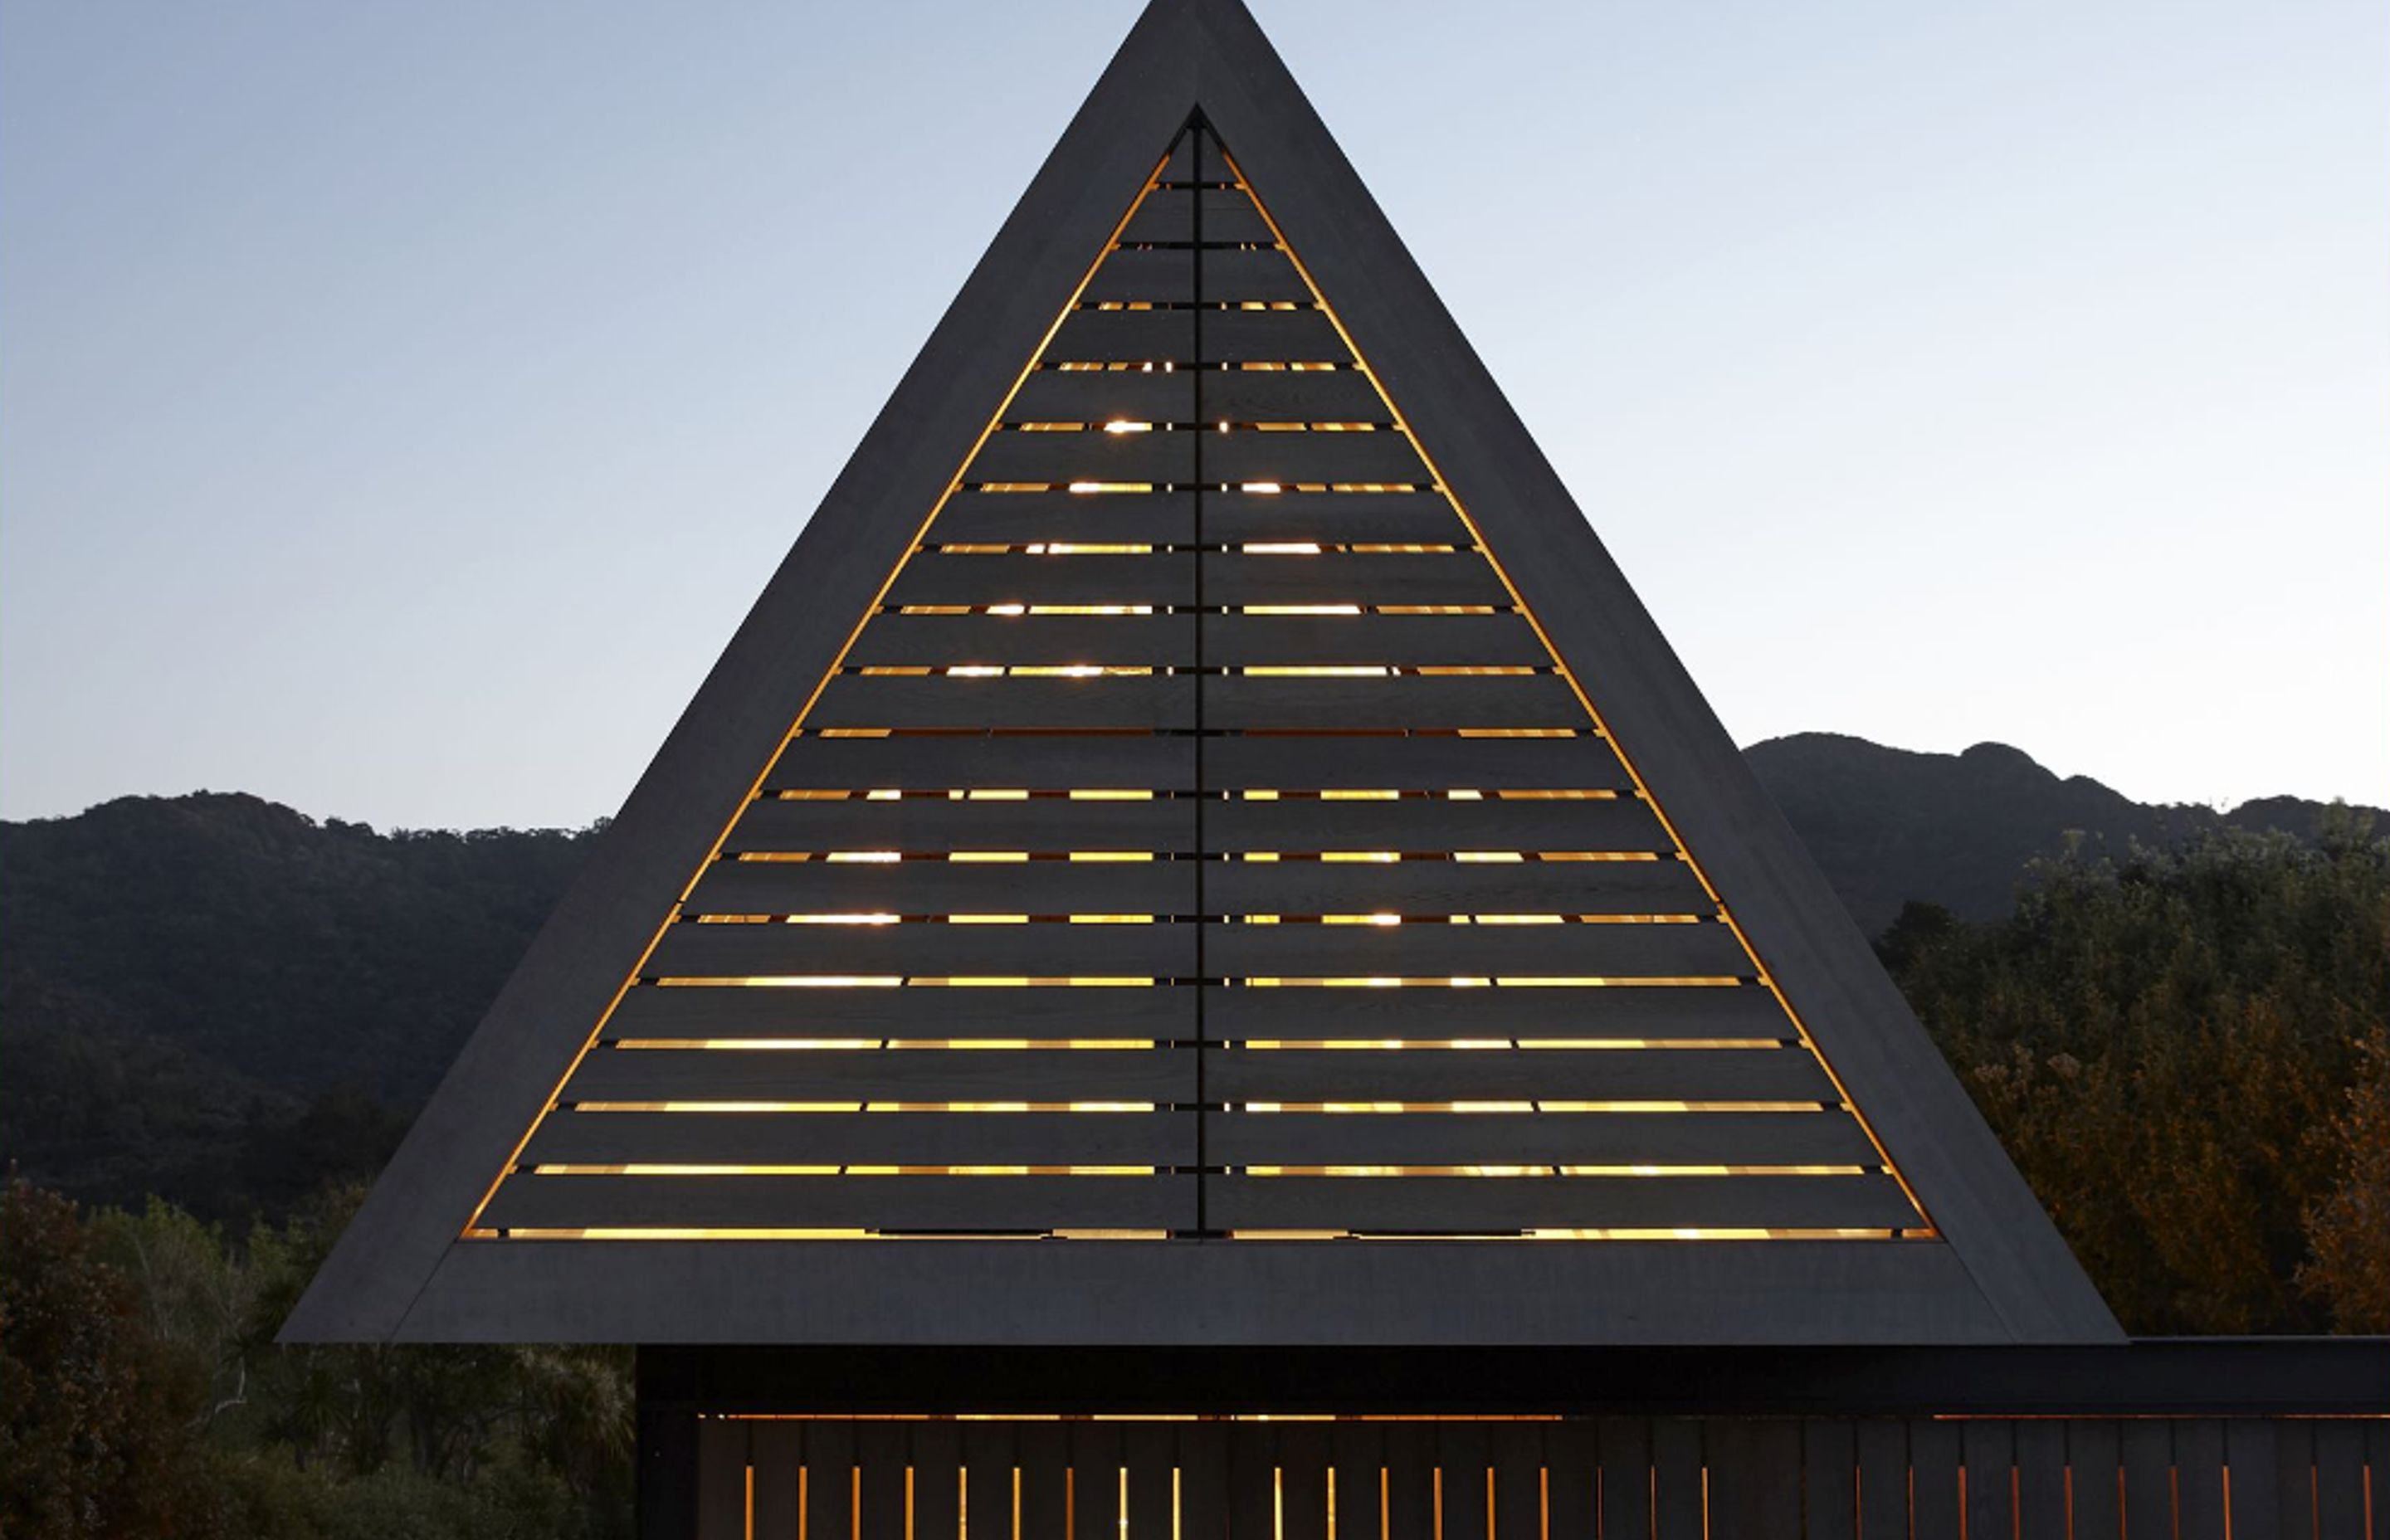 At night, when the dormer window shutters are closed, the triangle glows like a nautical beacon.